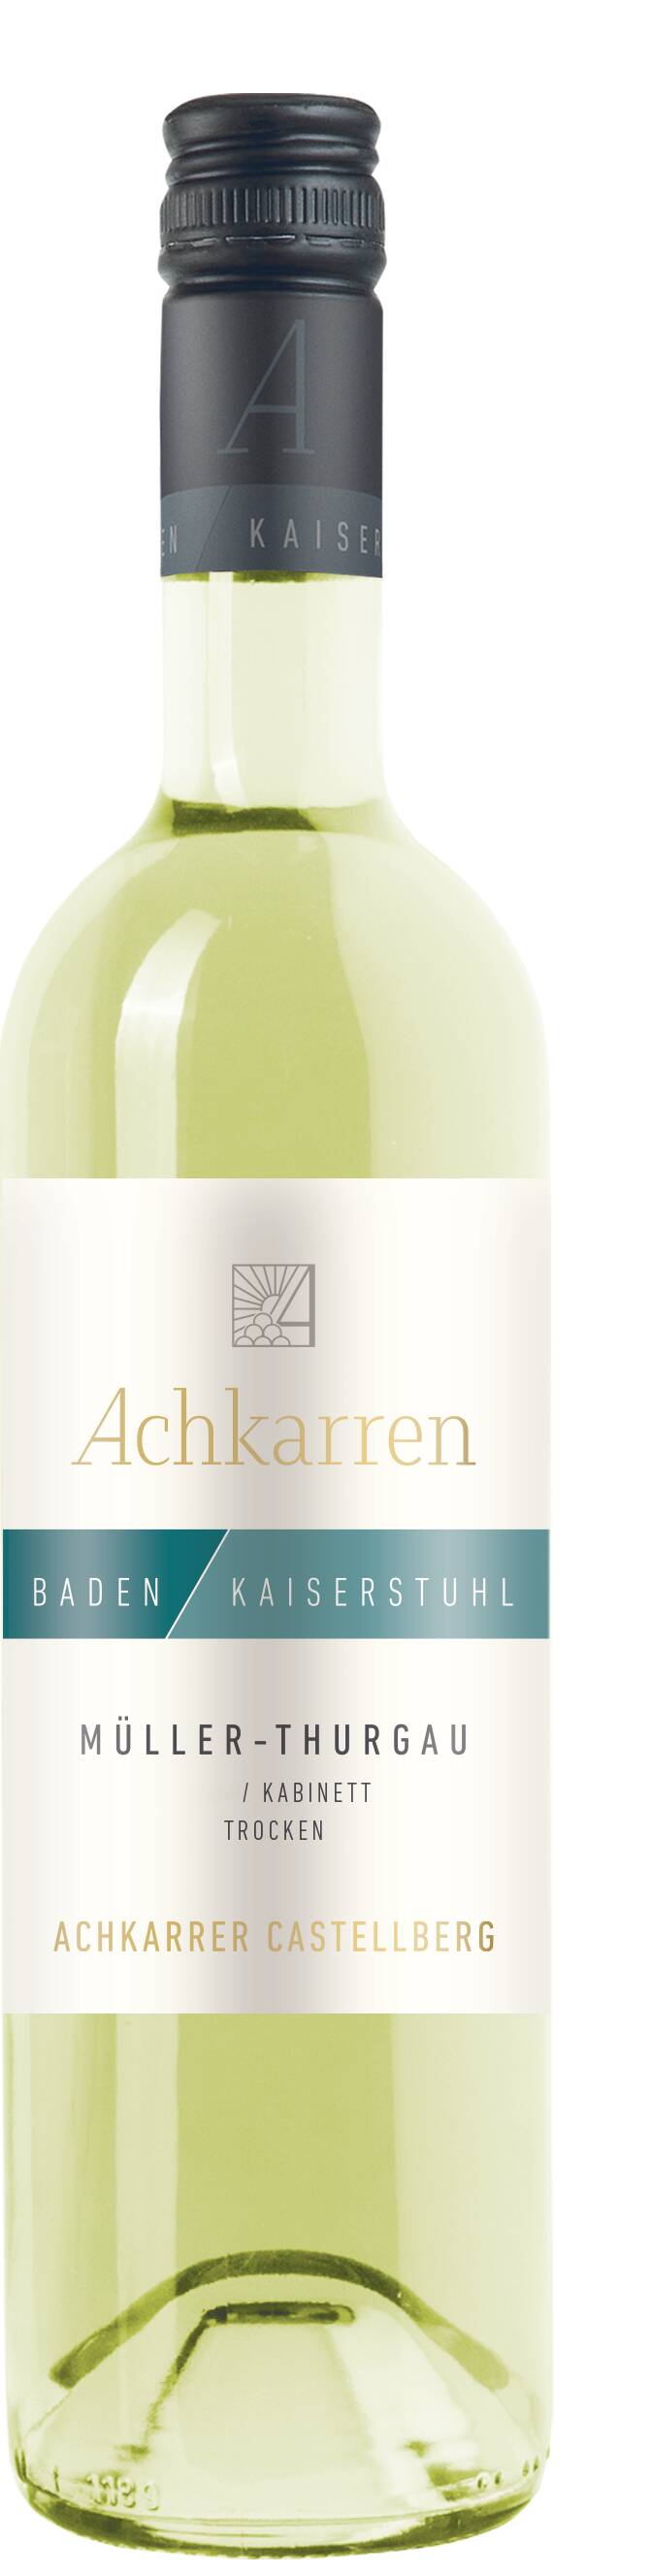 wein.plus find+buy: The wines of members our wein.plus | find+buy